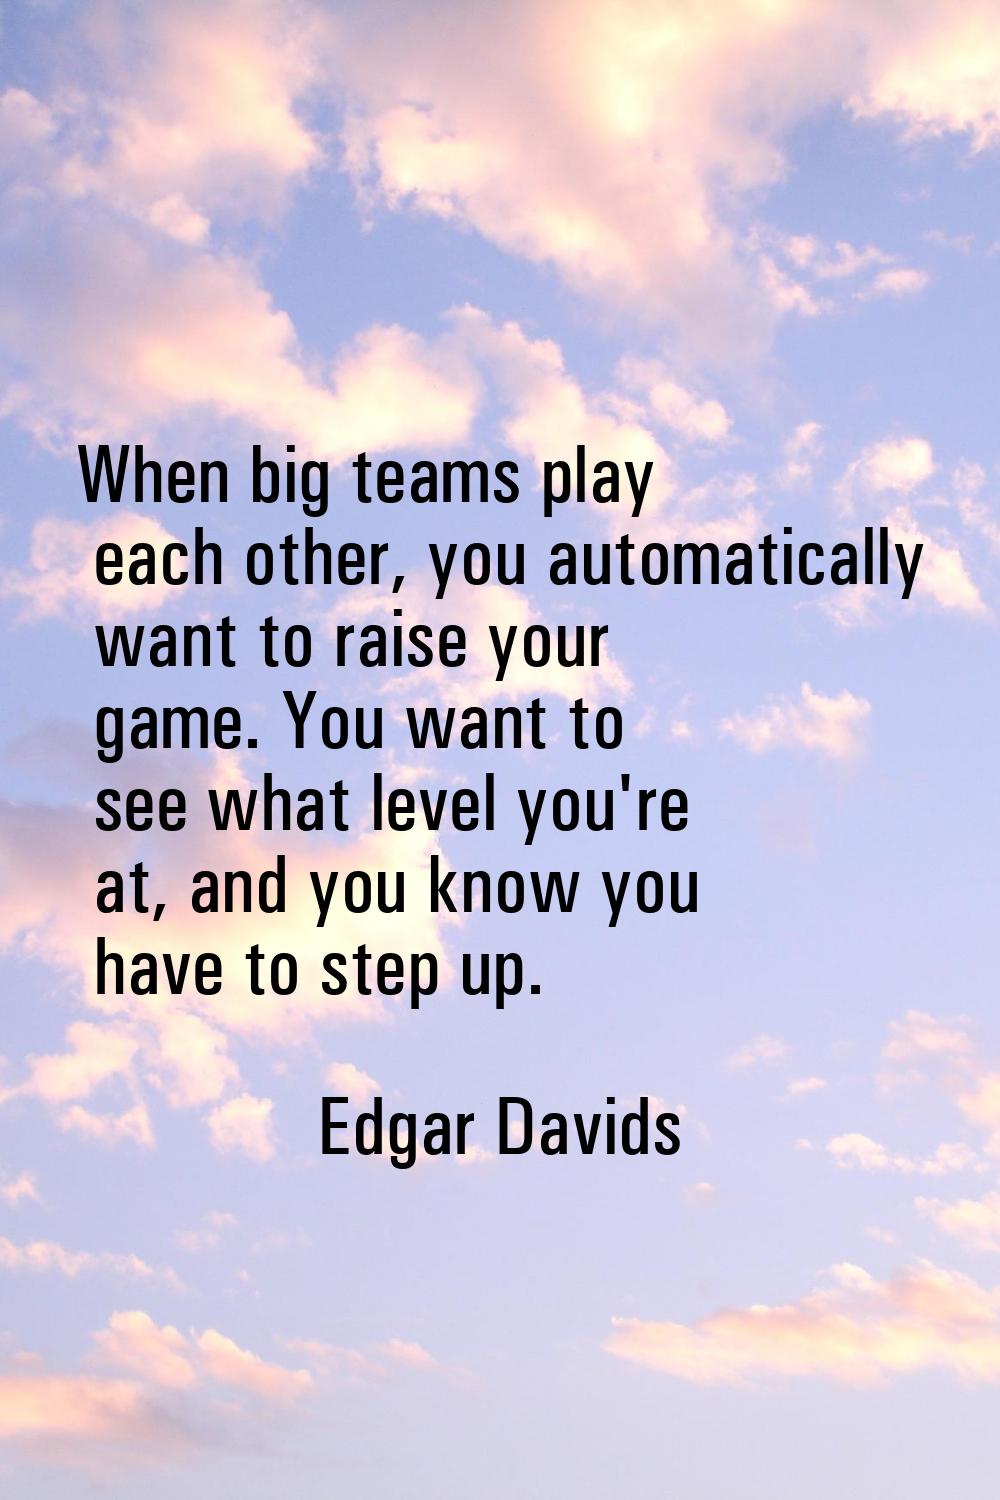 When big teams play each other, you automatically want to raise your game. You want to see what lev